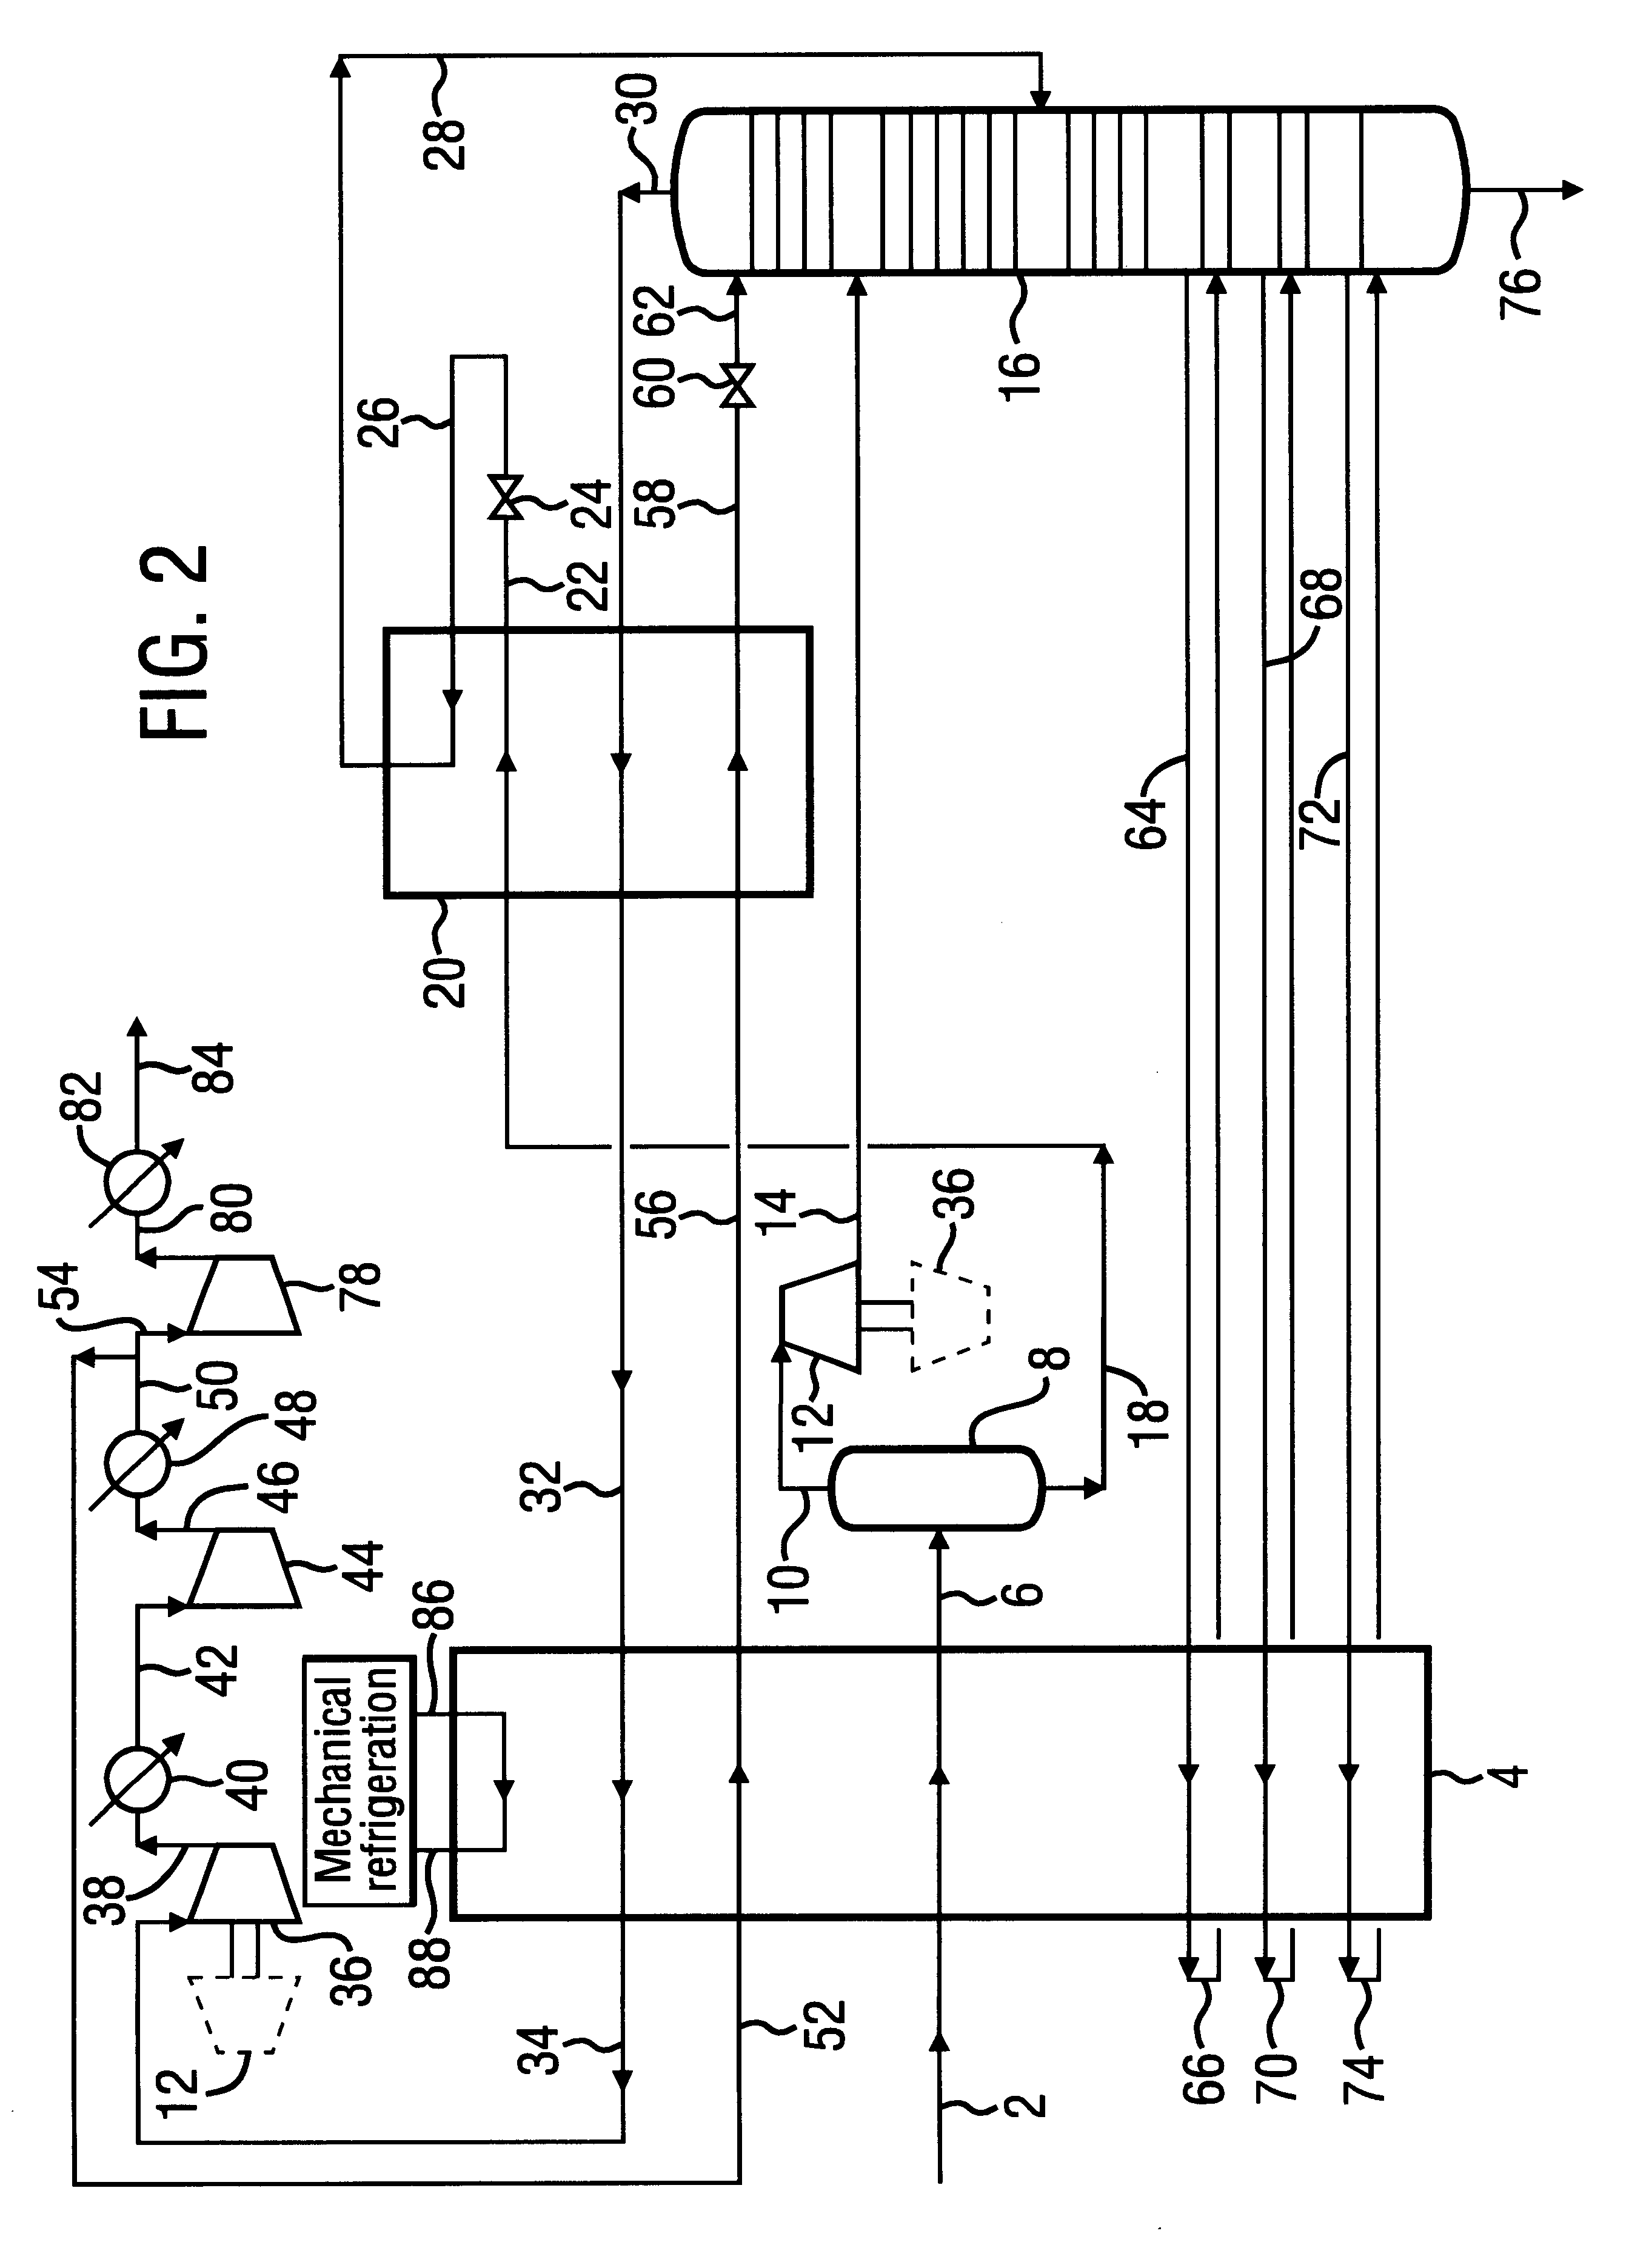 Hydrocarbon separation process and apparatus